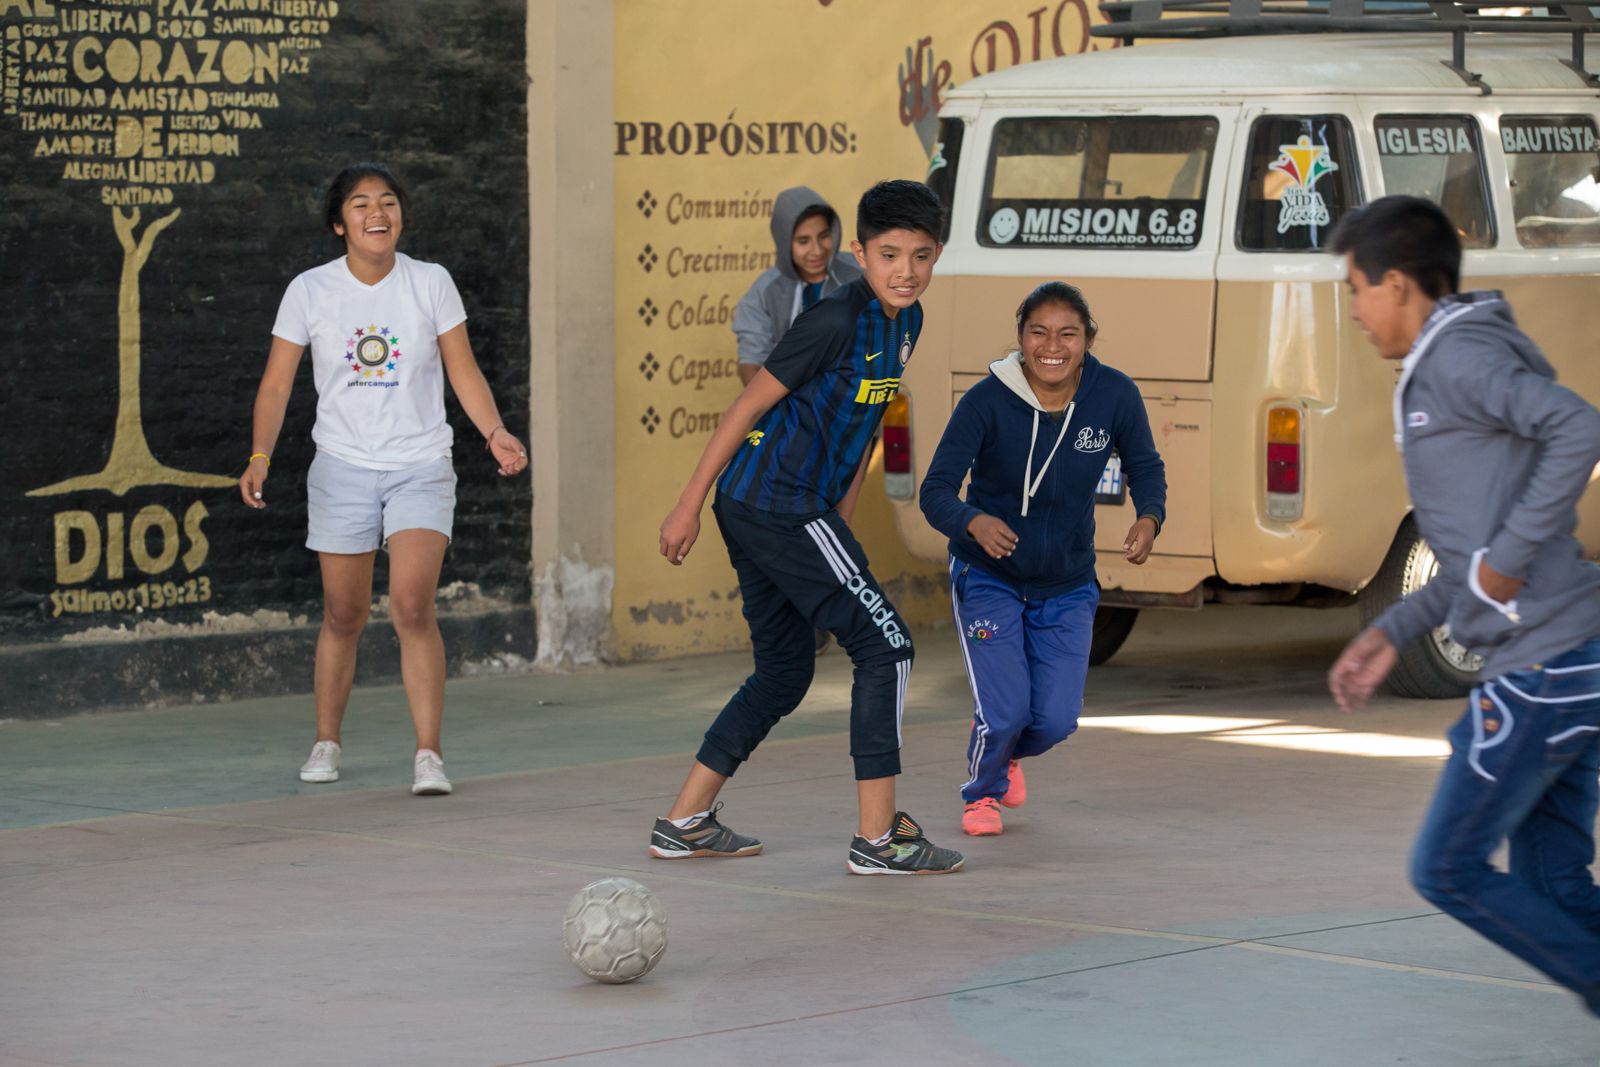 Young people play soccer at Villa Galindo Baptist Church in Cochabamba. Some children go to the church on weekends while their parents work. Others come from San Sebastian prison, which is overcrowded and has no playground. "Soccer, jumping around, it's part of letting off steam," Pastor Alex Villarroel said. Image by Tracey Eaton. Bolivia, 2017.